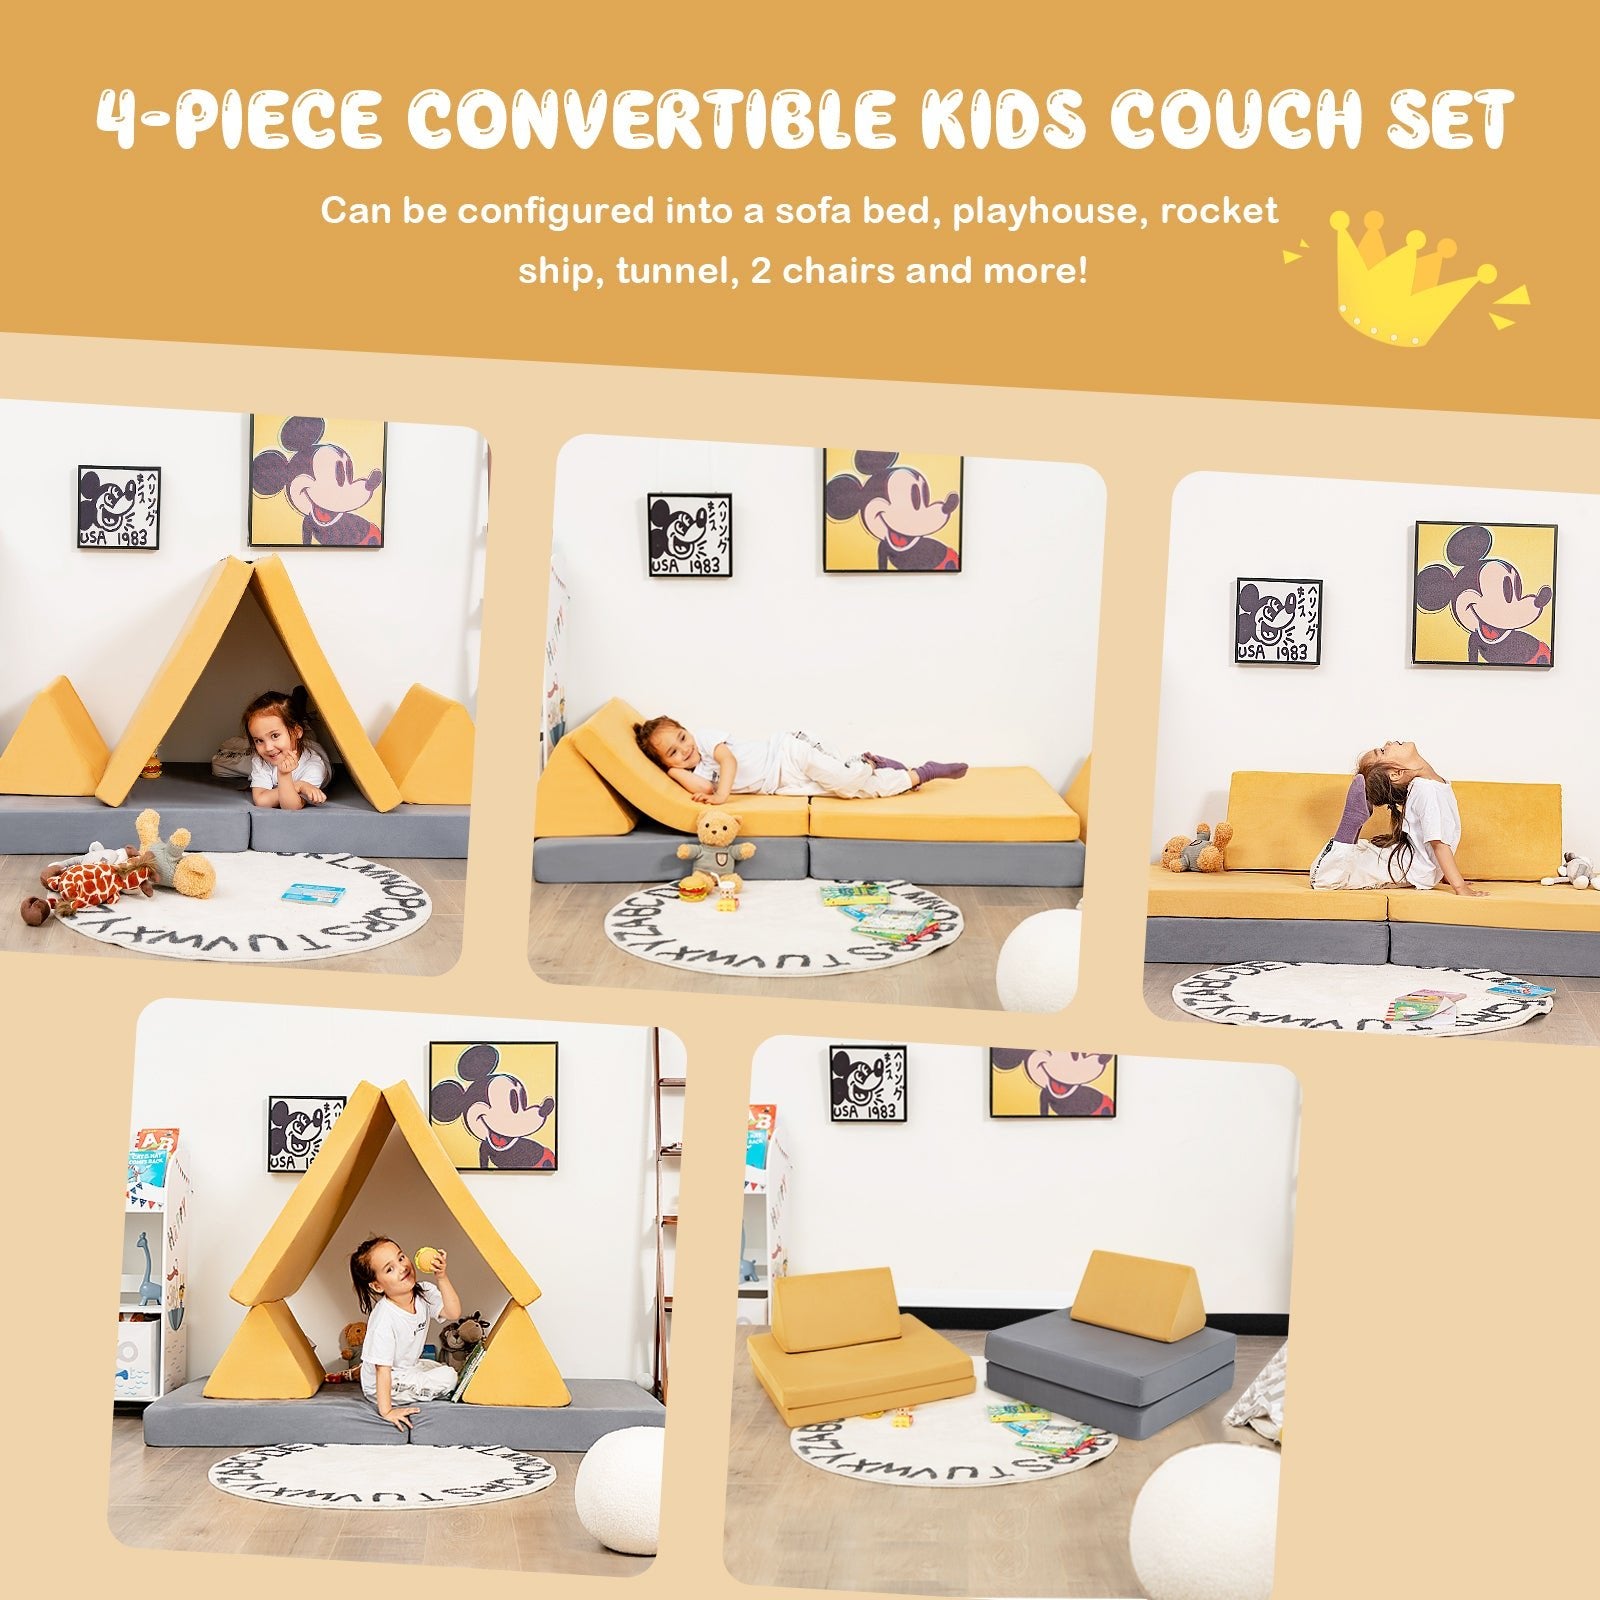 Kids Couch Set - Yellow Convertible Design with 2 Folding Mats - 4-Piece